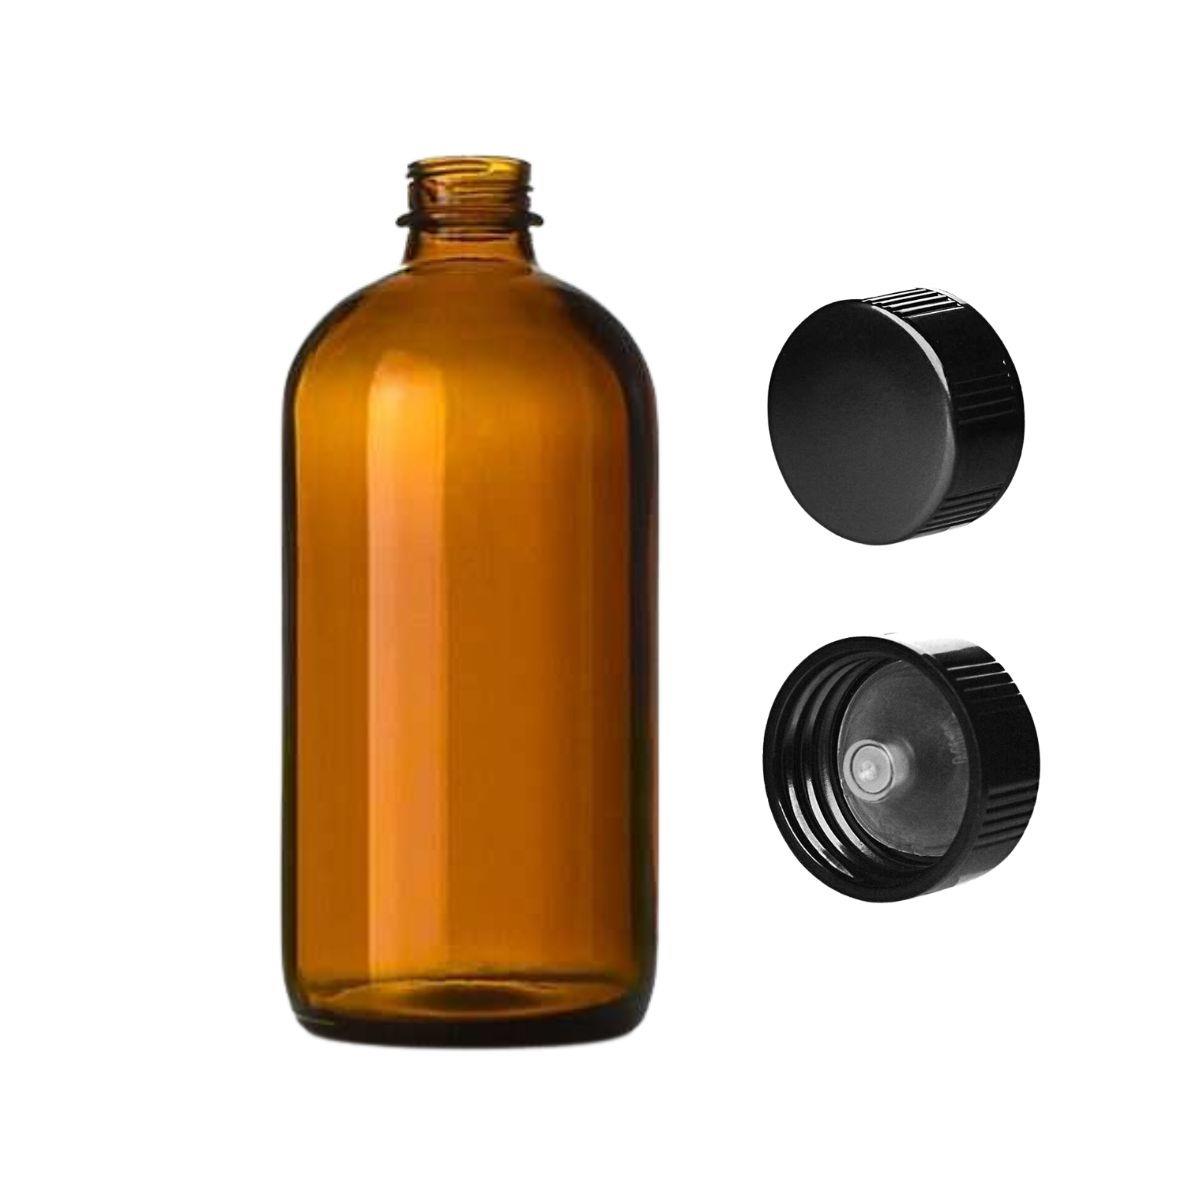 16 oz Amber Glass Bottle with Cap